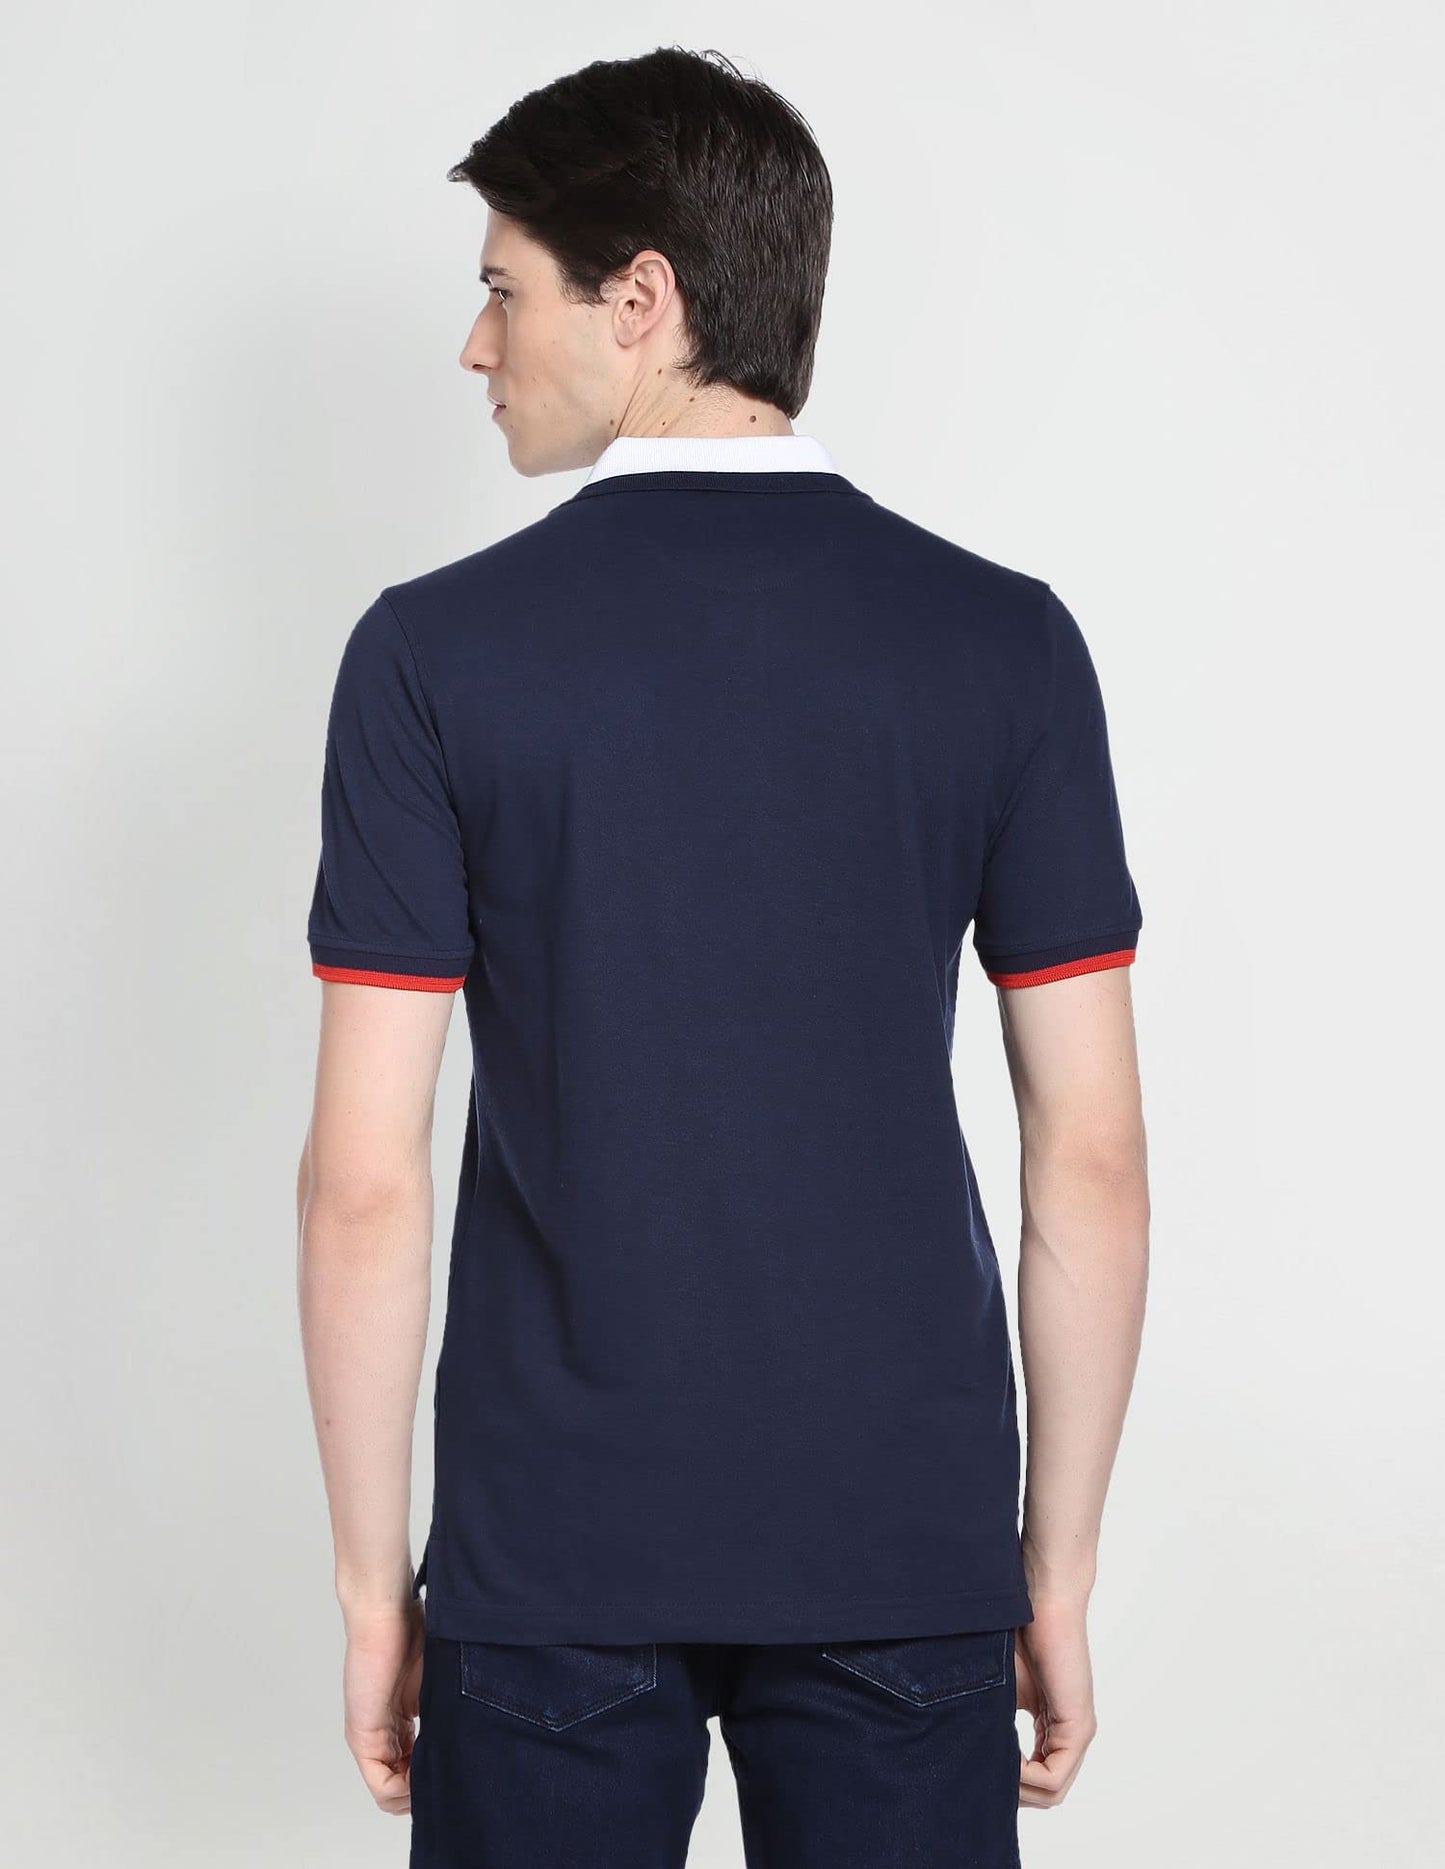 Arrow Sports Navy Solid Polo T-Shirt (ASAEOTS3834_S) 